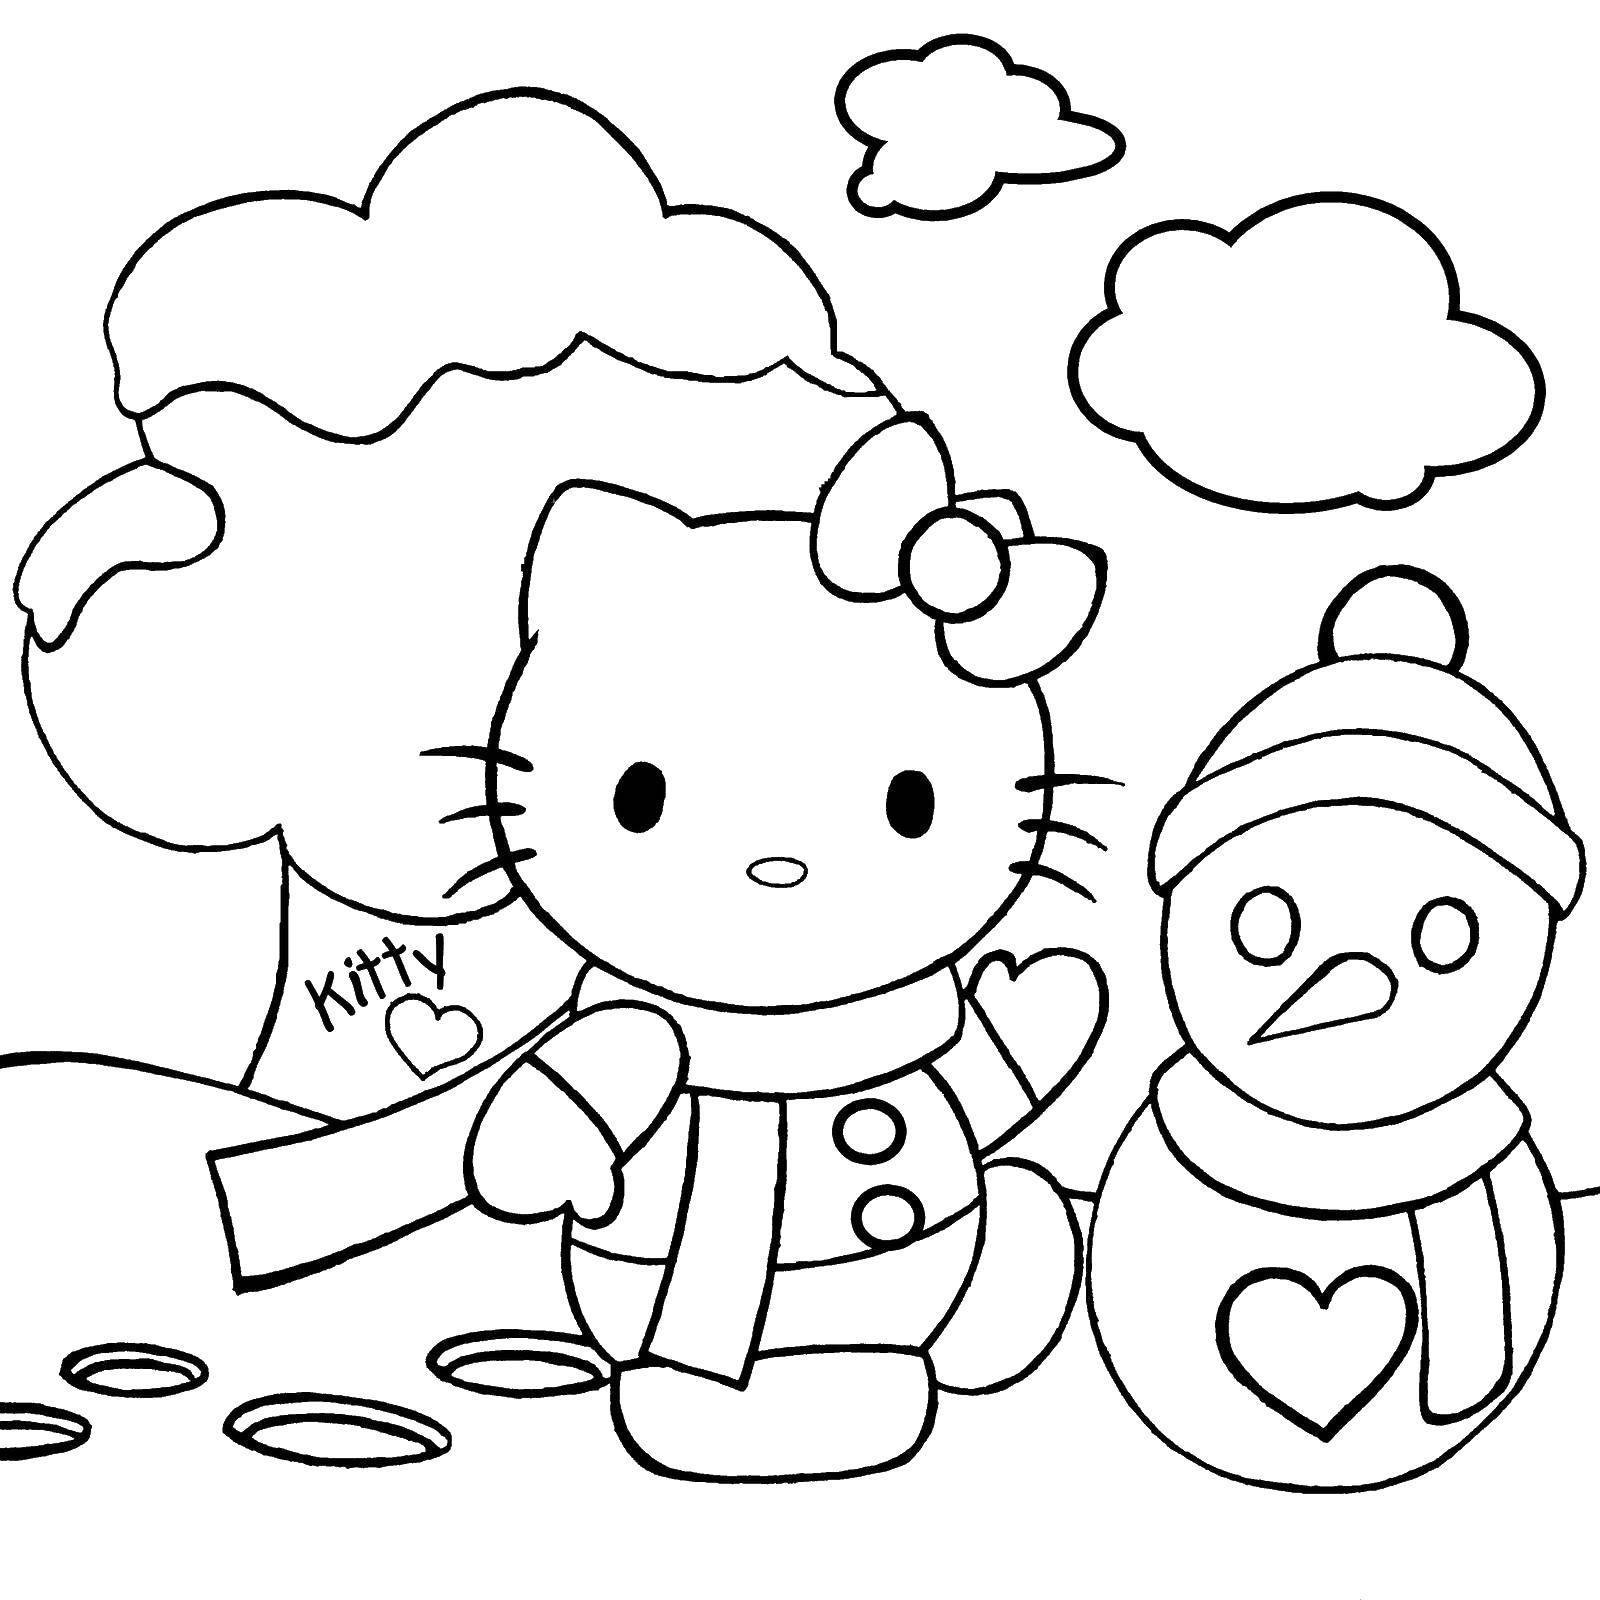 Coloring Kitty and snowman. Category Hello Kitty. Tags:  kitty, snowman.